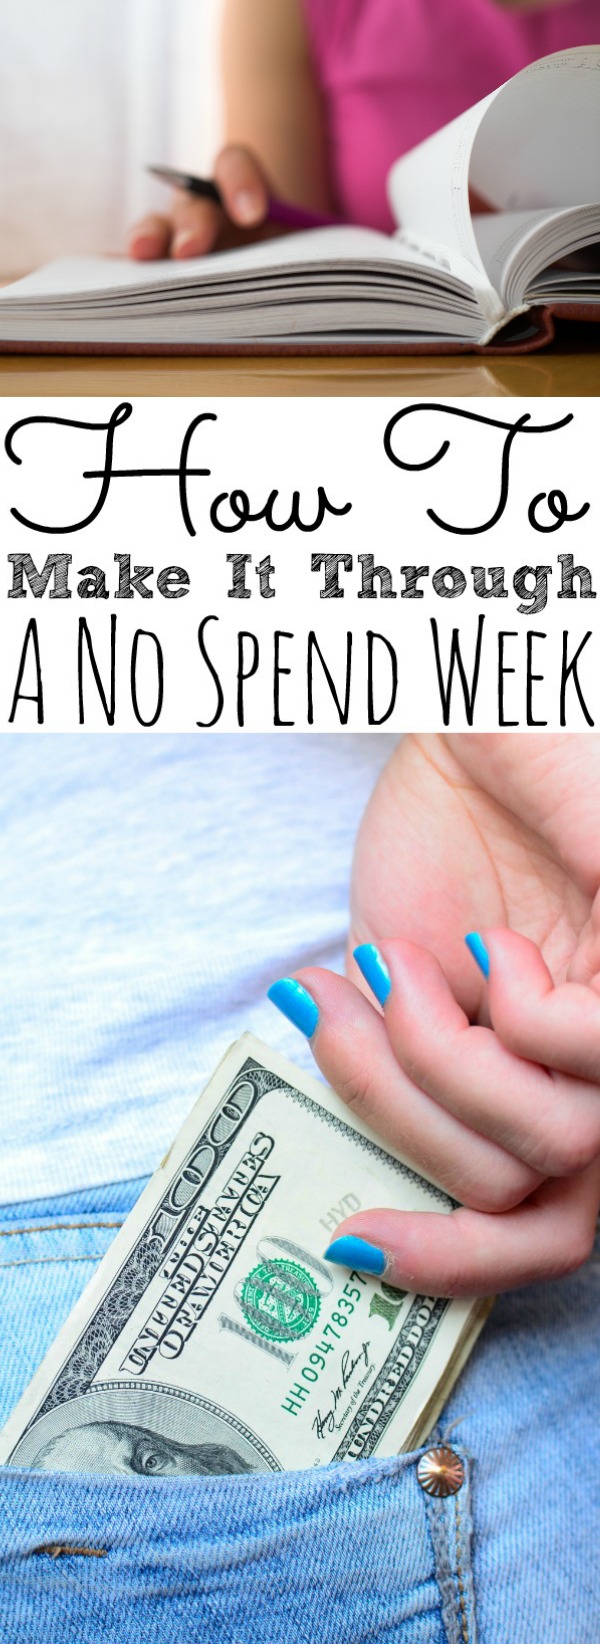 Tips On Saving Money For An Entire Week - simplytodaylife.com